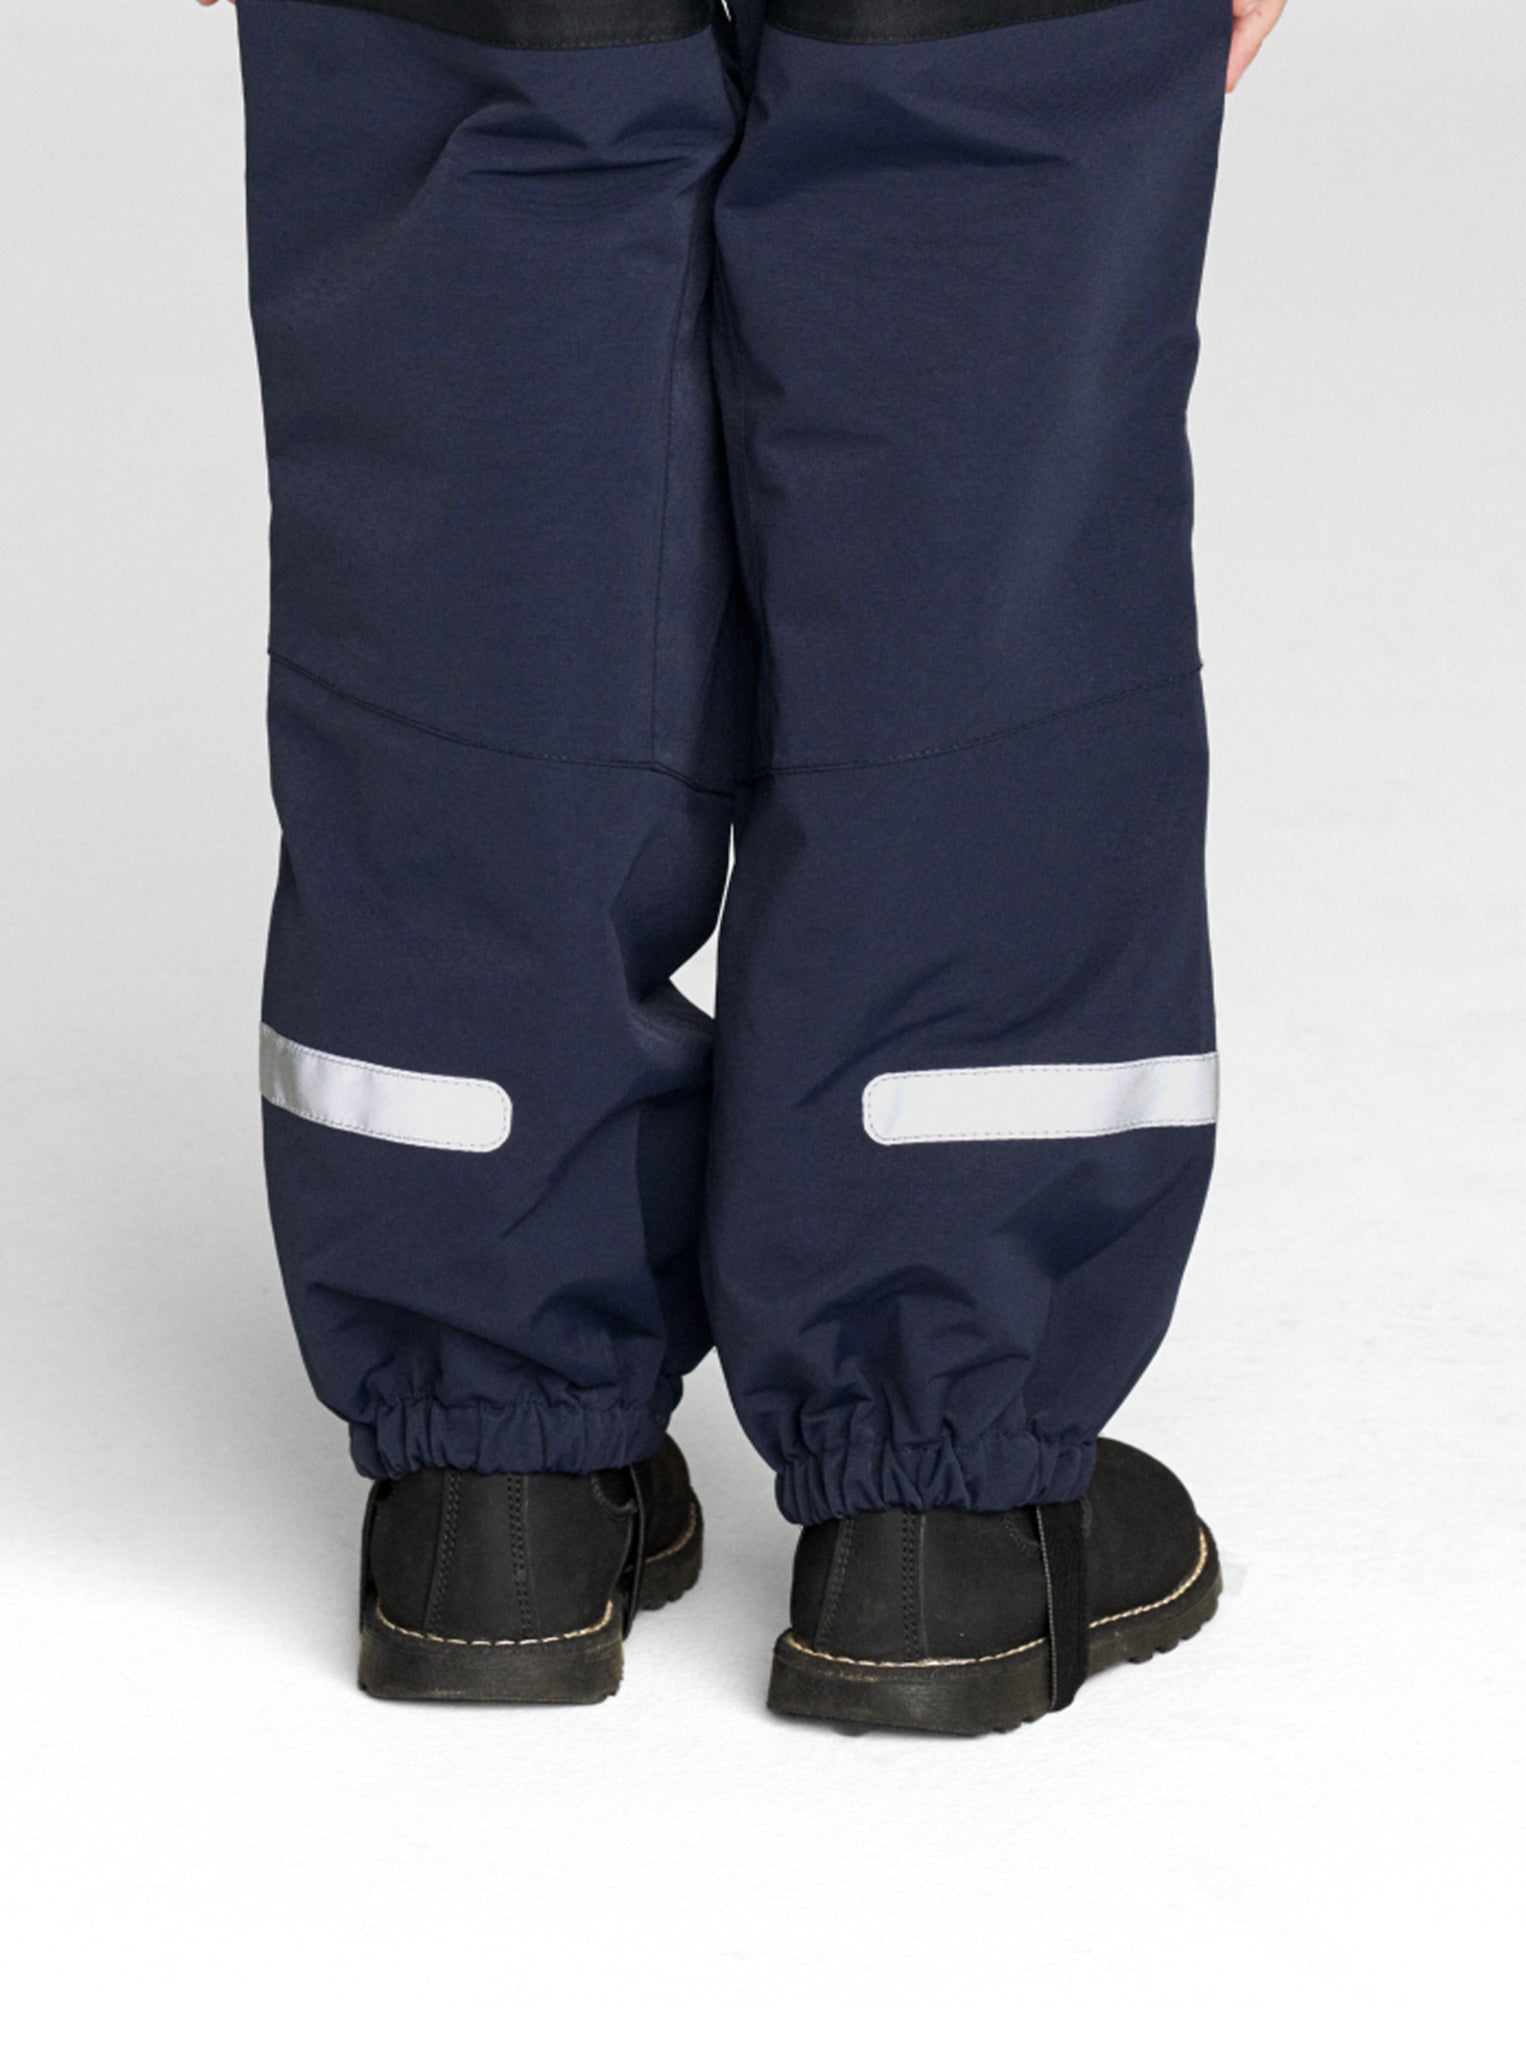 Navy Kids Waterproof Trousers from the Polarn O. Pyret kidswear collection. Quality kids clothing made to last.